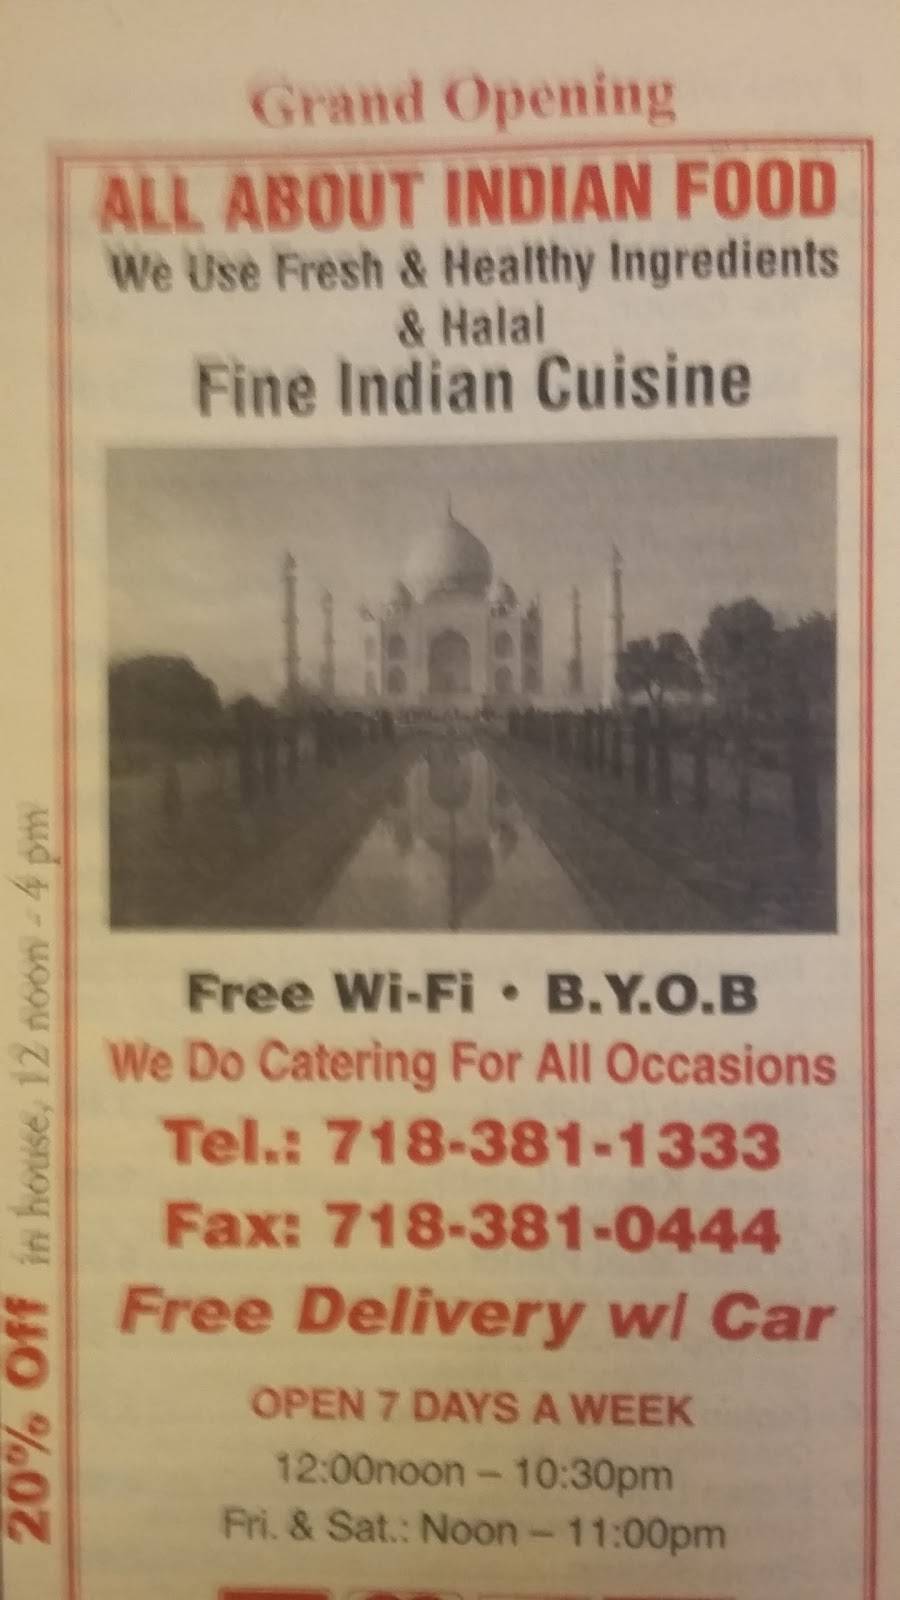 All About Indian Food | restaurant | 443 Bushwick Ave, Brooklyn, NY 11206, USA | 7183811333 OR +1 718-381-1333